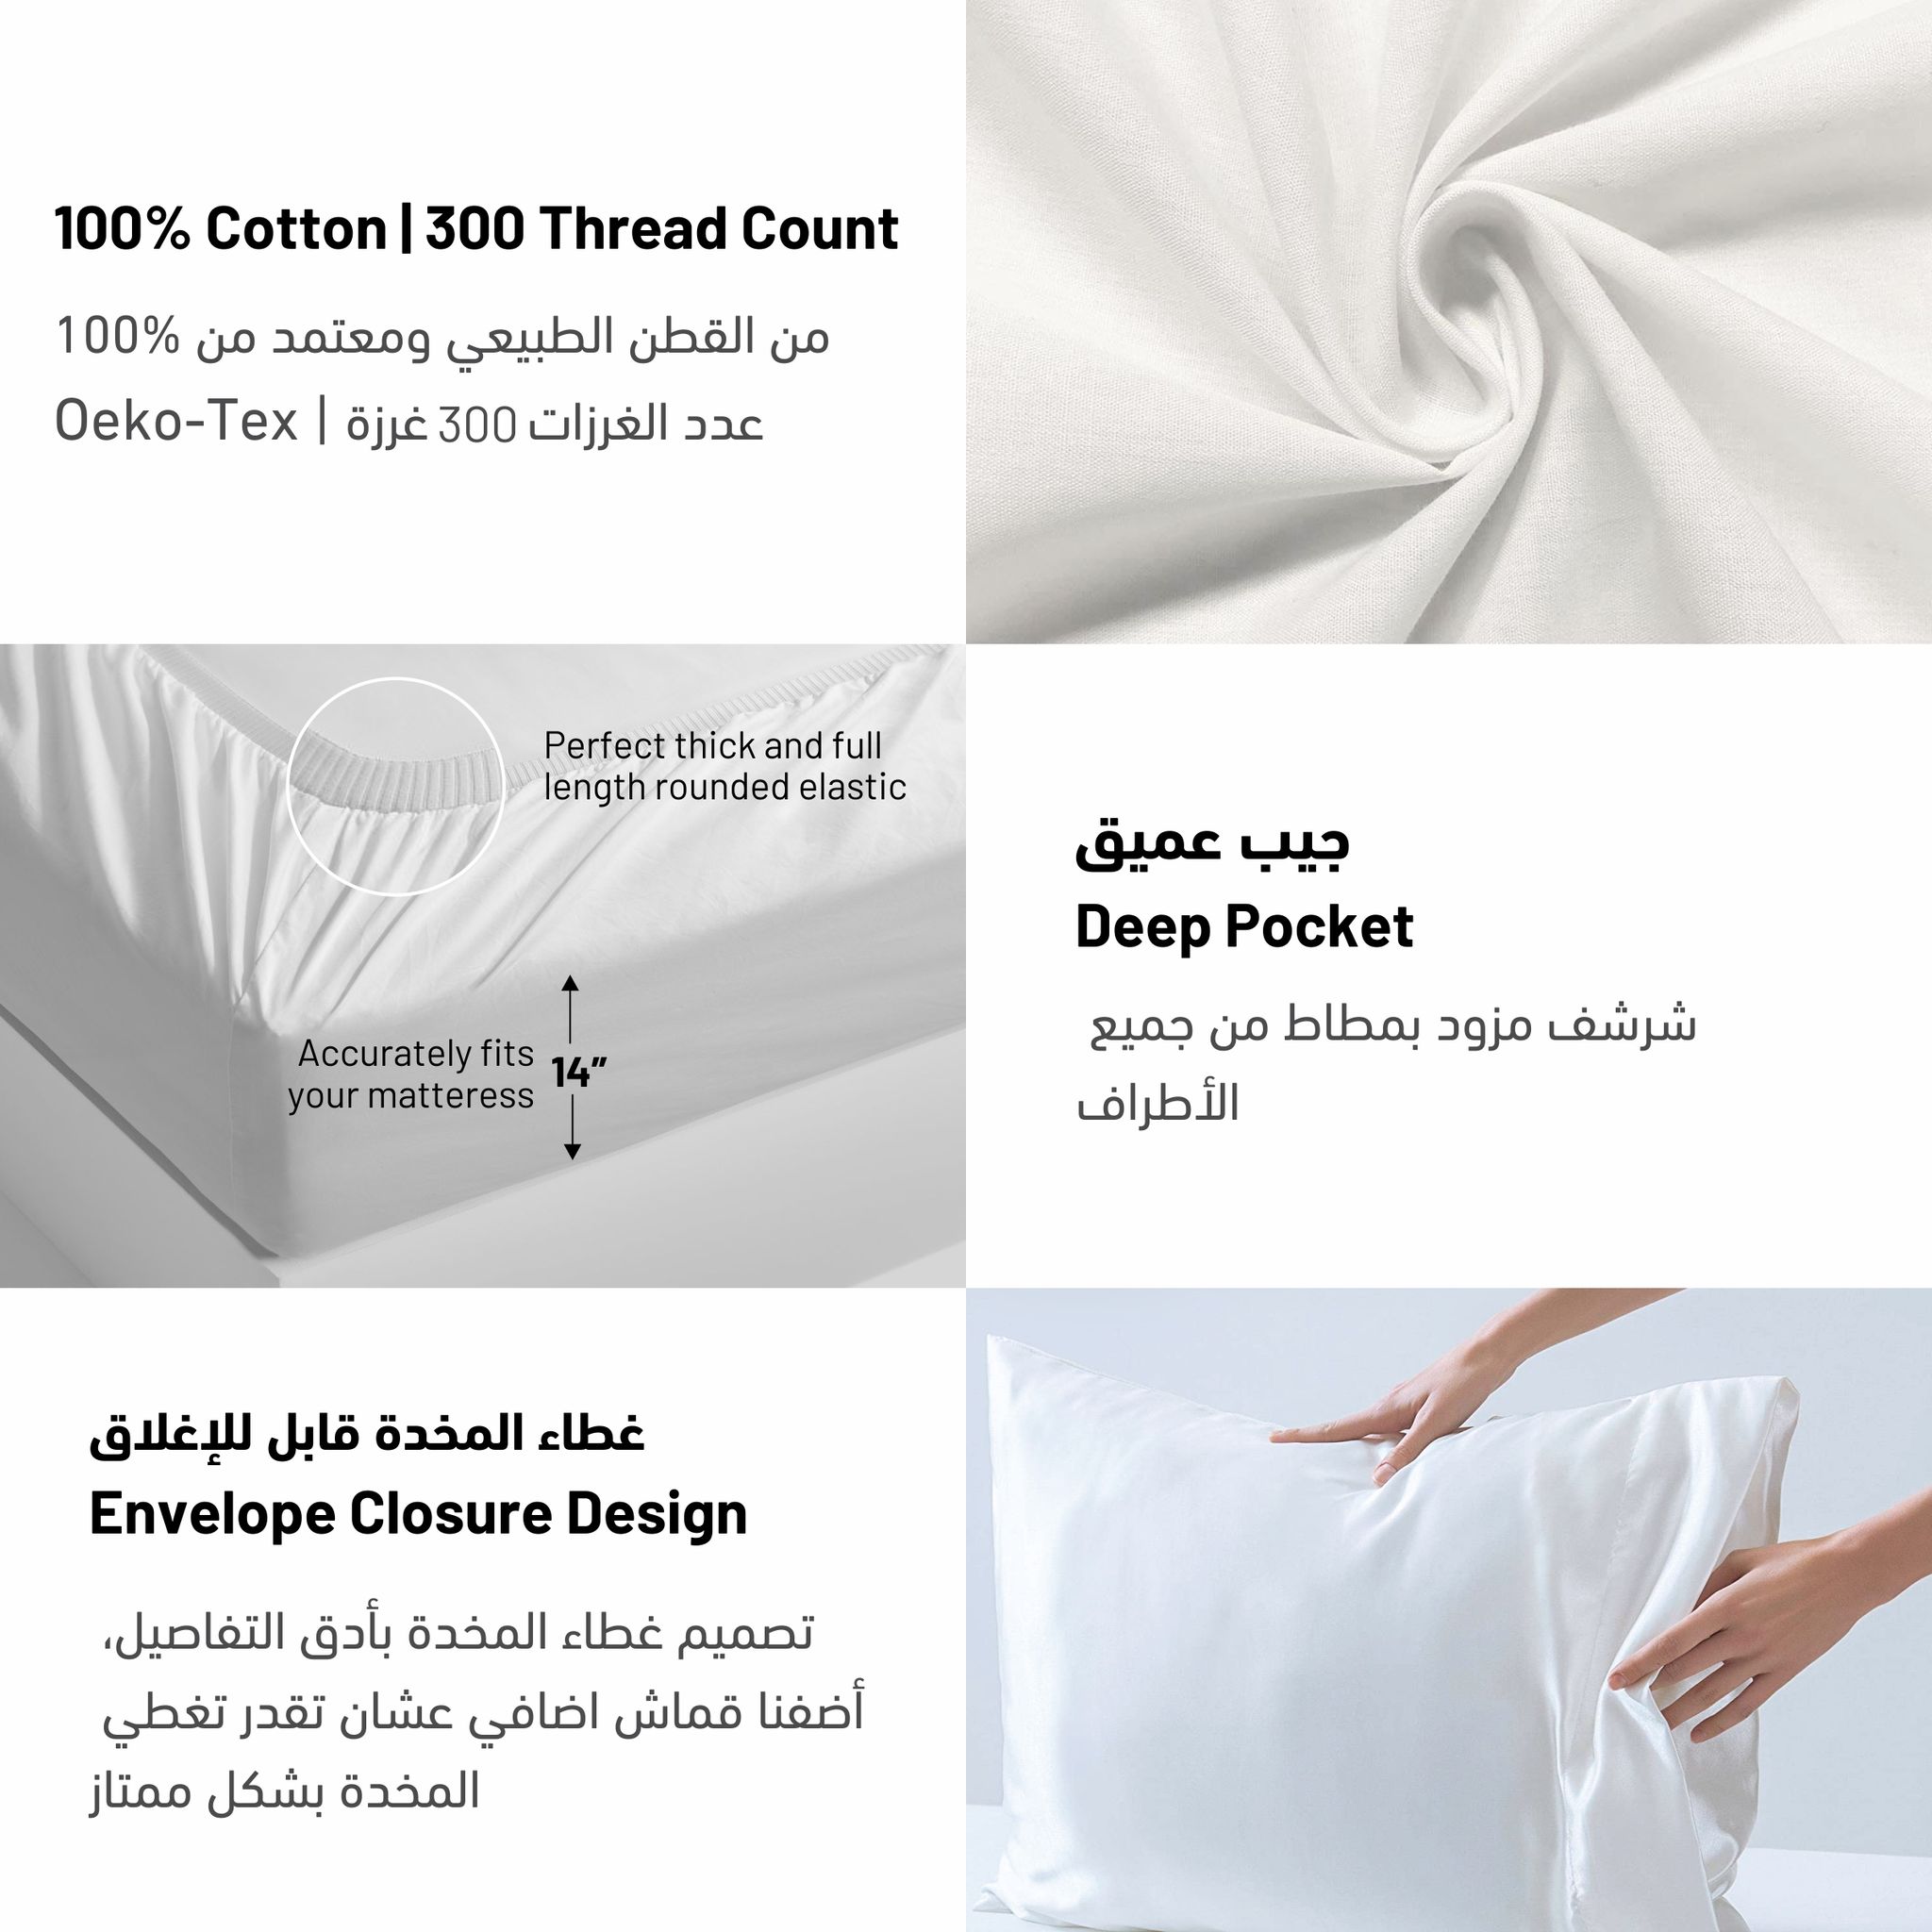 300 Thread Count 100% Natural Cotton Printed Duvet Set 3-Piece King Ivory